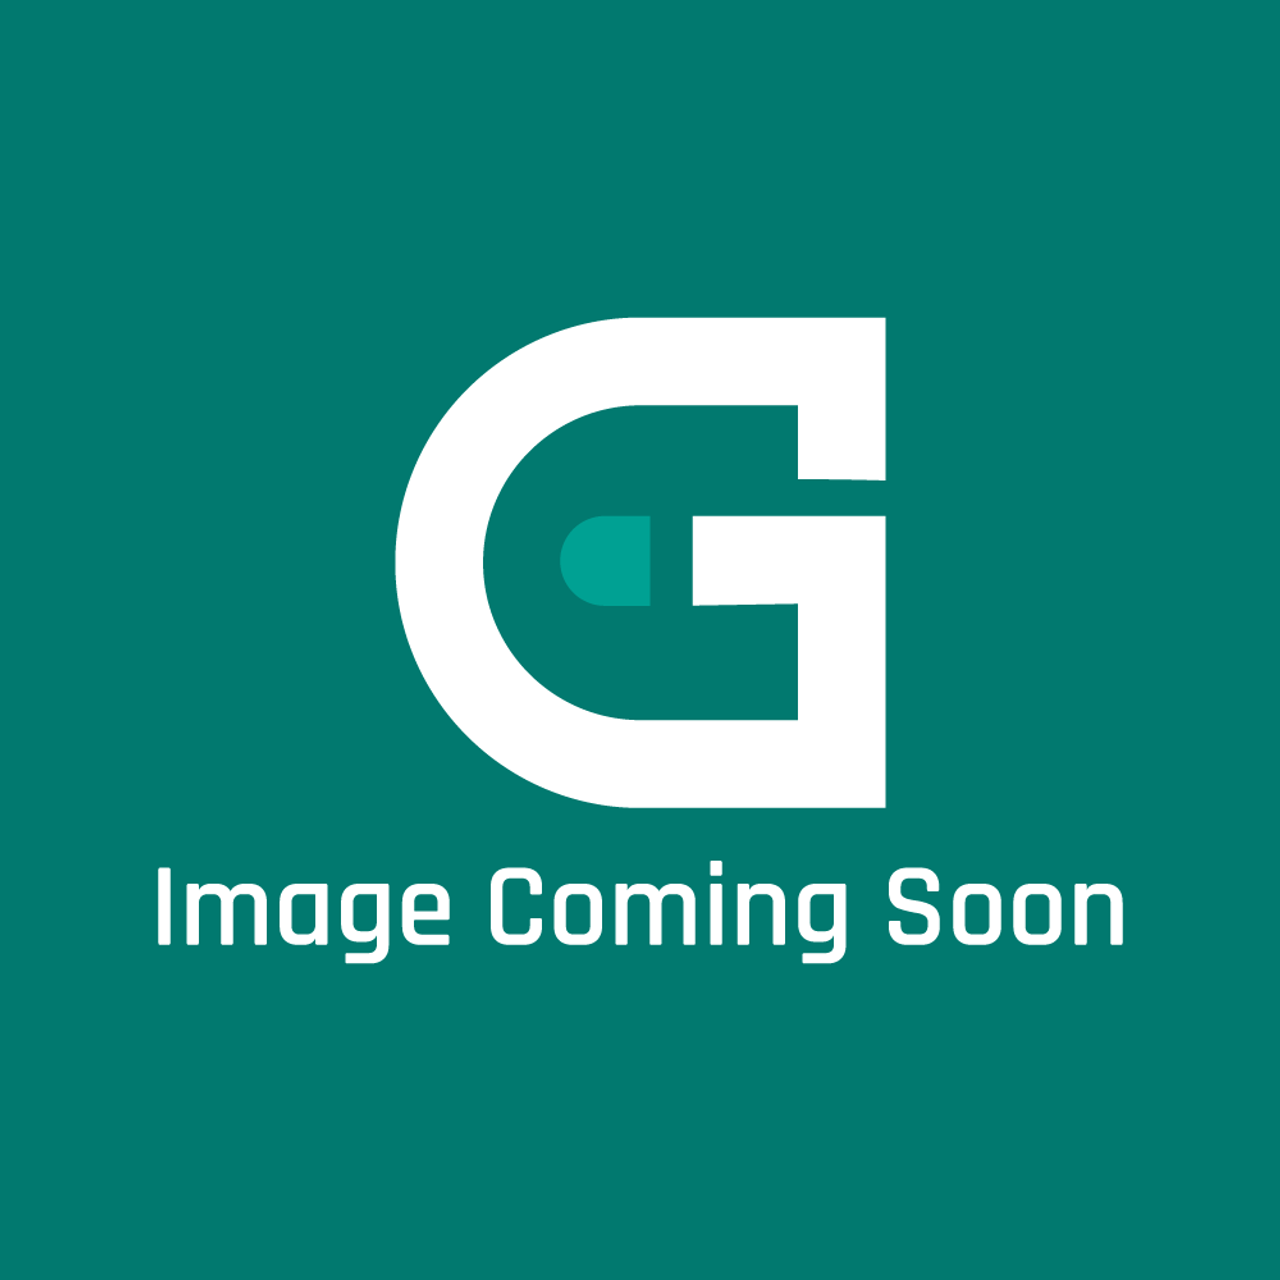 GE Appliances 69W97 - 1/3 Hp825208-230/60/1 - Image Coming Soon!